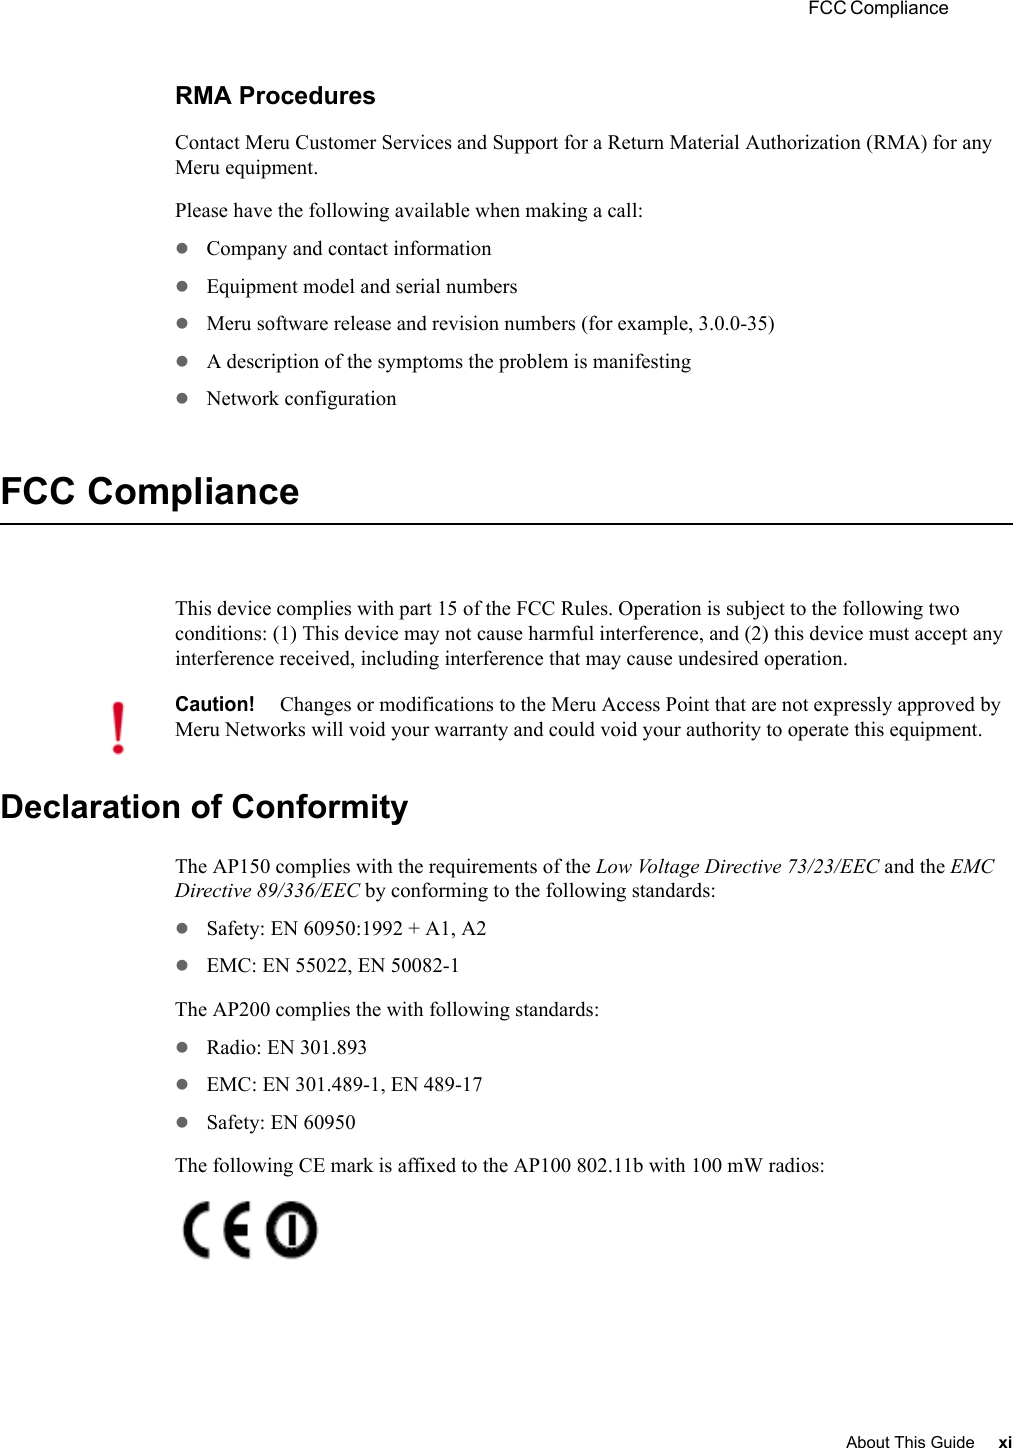  FCC Compliance About This Guide xi RMA ProceduresContact Meru Customer Services and Support for a Return Material Authorization (RMA) for any Meru equipment.Please have the following available when making a call:zCompany and contact informationzEquipment model and serial numberszMeru software release and revision numbers (for example, 3.0.0-35)zA description of the symptoms the problem is manifestingzNetwork configurationFCC ComplianceThis device complies with part 15 of the FCC Rules. Operation is subject to the following two conditions: (1) This device may not cause harmful interference, and (2) this device must accept any interference received, including interference that may cause undesired operation.Declaration of ConformityThe AP150 complies with the requirements of the Low Voltage Directive 73/23/EEC and the EMC Directive 89/336/EEC by conforming to the following standards:zSafety: EN 60950:1992 + A1, A2zEMC: EN 55022, EN 50082-1The AP200 complies the with following standards:zRadio: EN 301.893zEMC: EN 301.489-1, EN 489-17zSafety: EN 60950The following CE mark is affixed to the AP100 802.11b with 100 mW radios:Caution!Changes or modifications to the Meru Access Point that are not expressly approved by Meru Networks will void your warranty and could void your authority to operate this equipment.